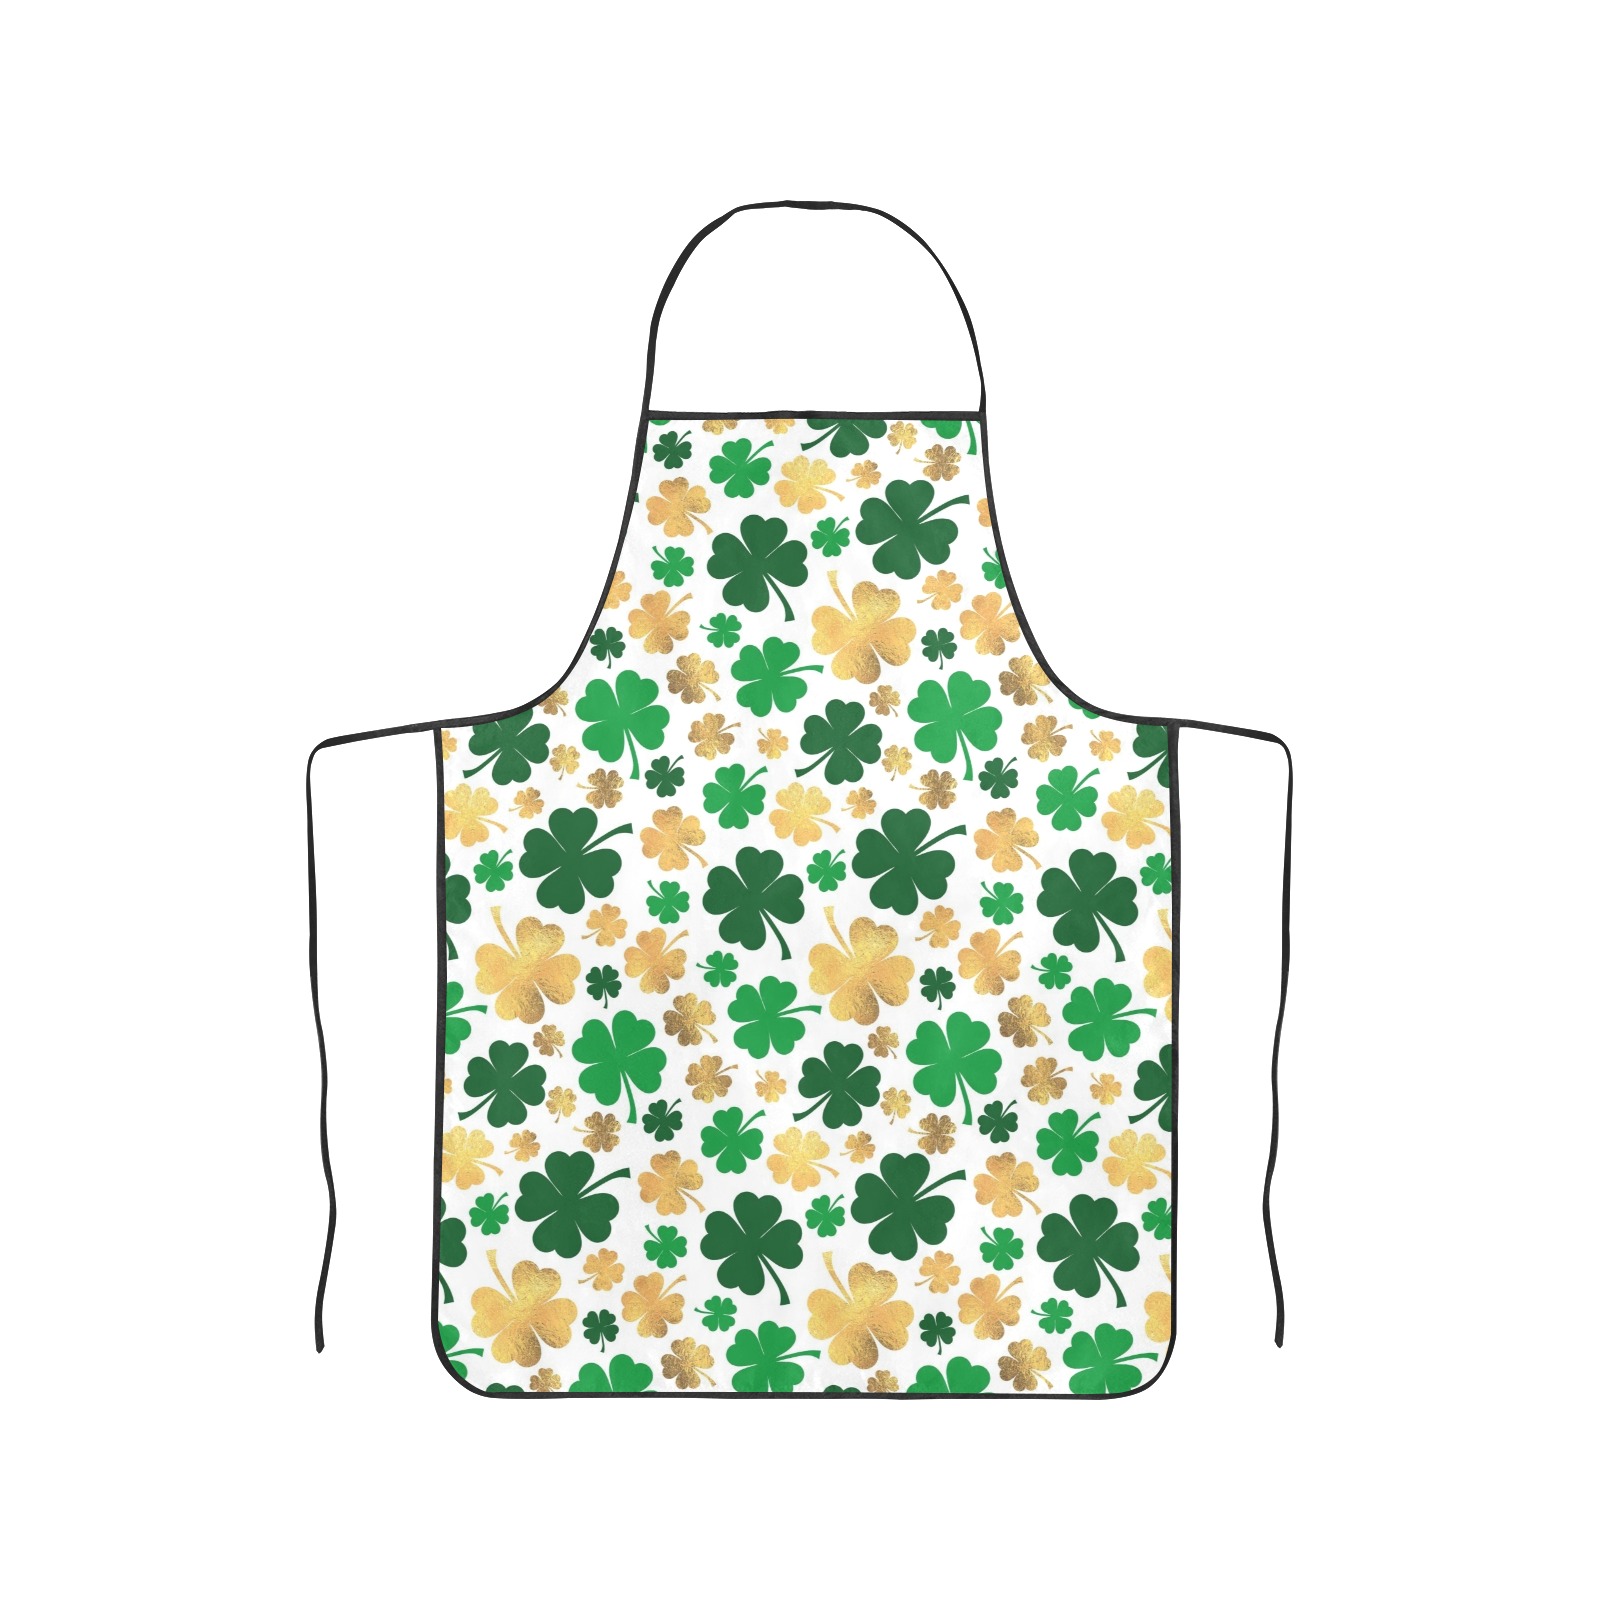 St Patrick's Day - Gold and Green (7) Women's Overlock Apron